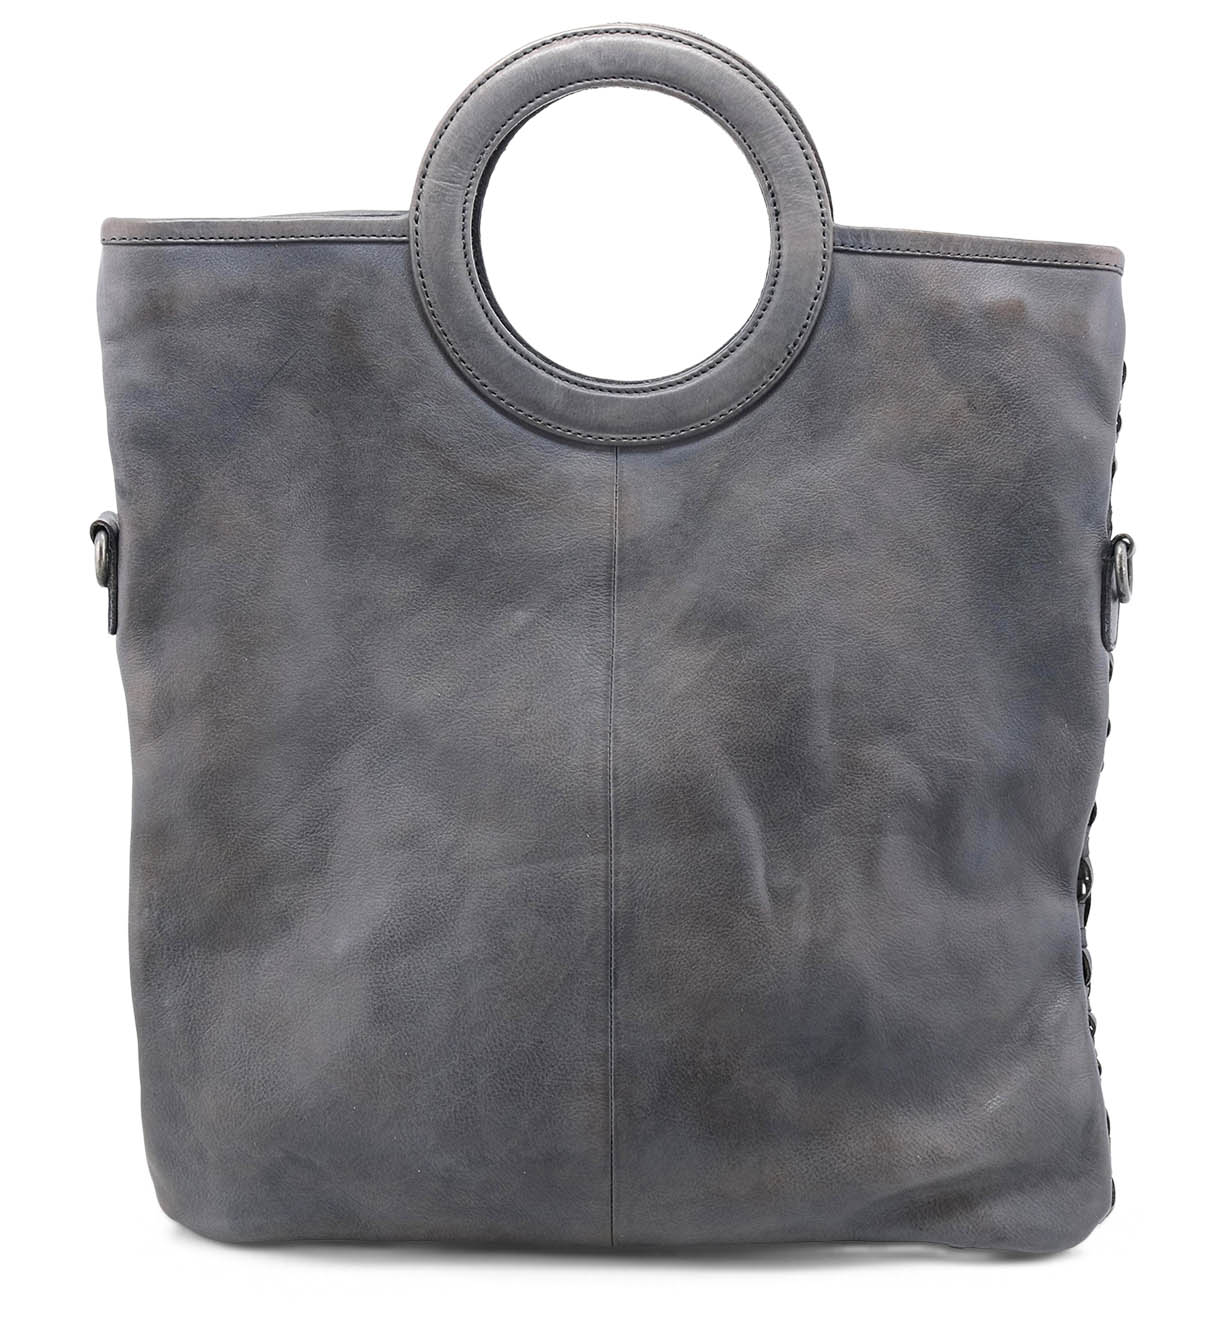 An Adele grey leather tote bag with a metal handle by Bed Stu.